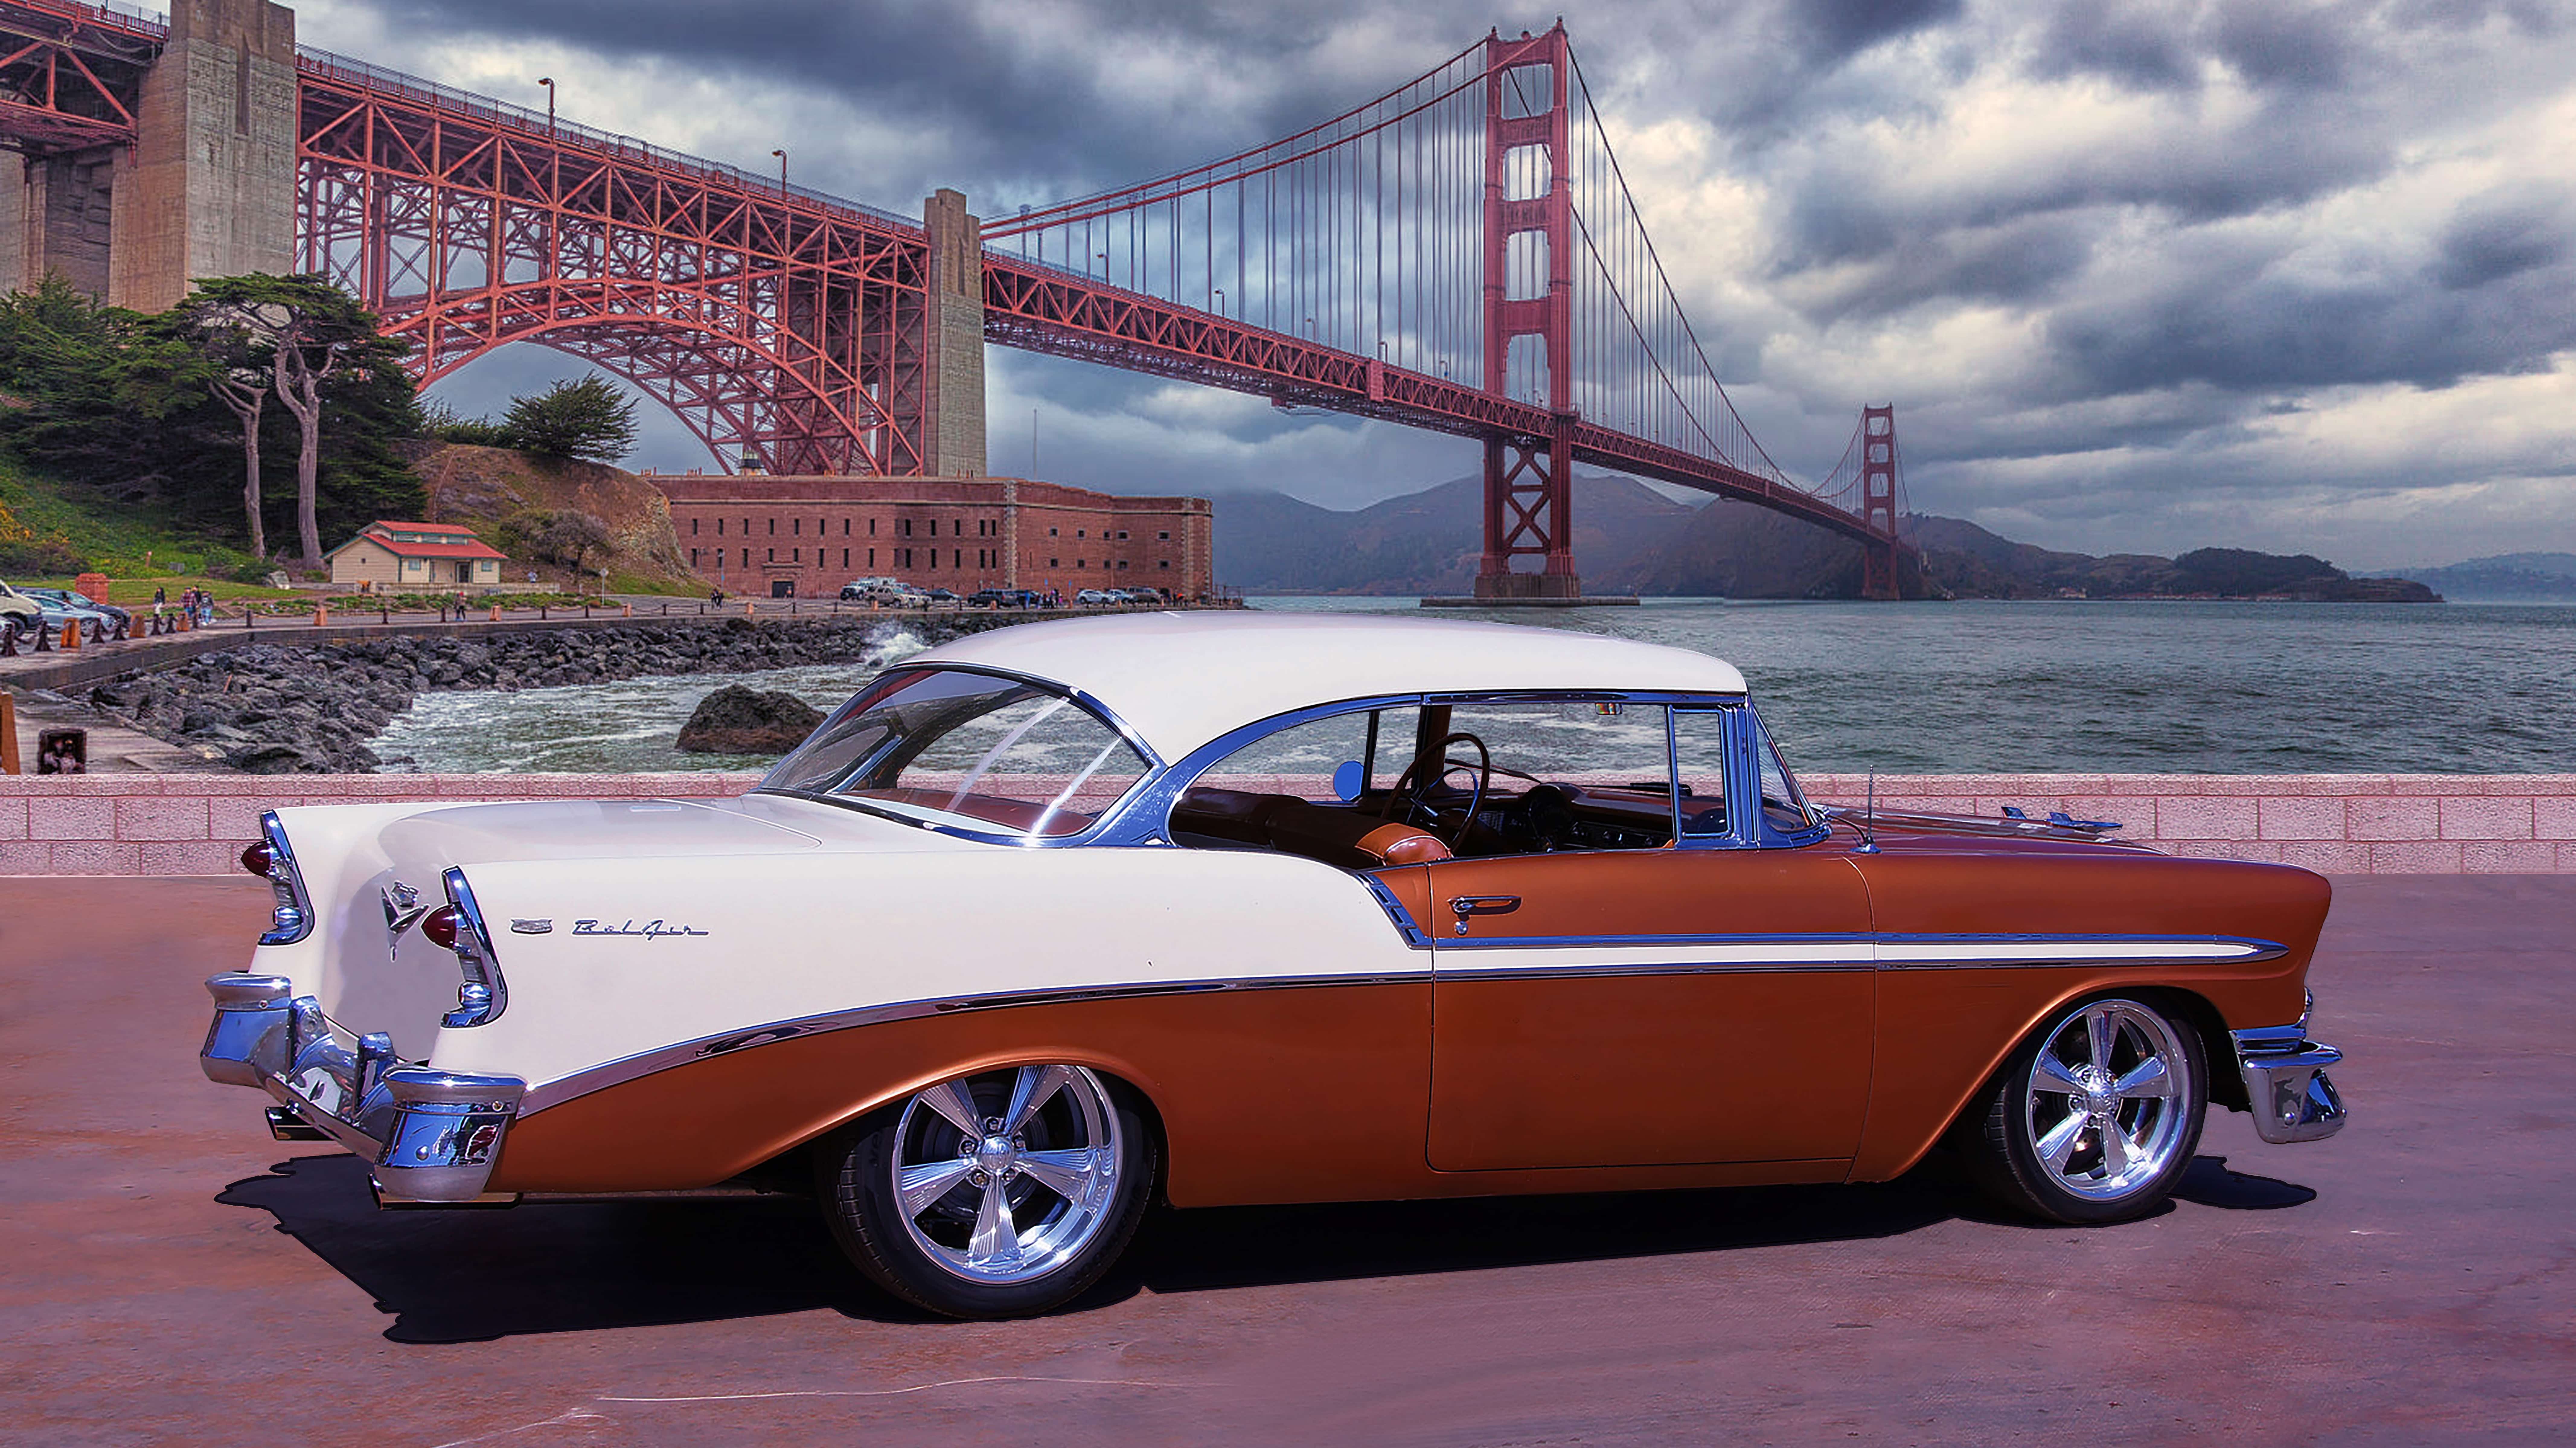 1956 Chevy Belair Hardtop (two Tone) is an HD wallpaper posted in cars cate...